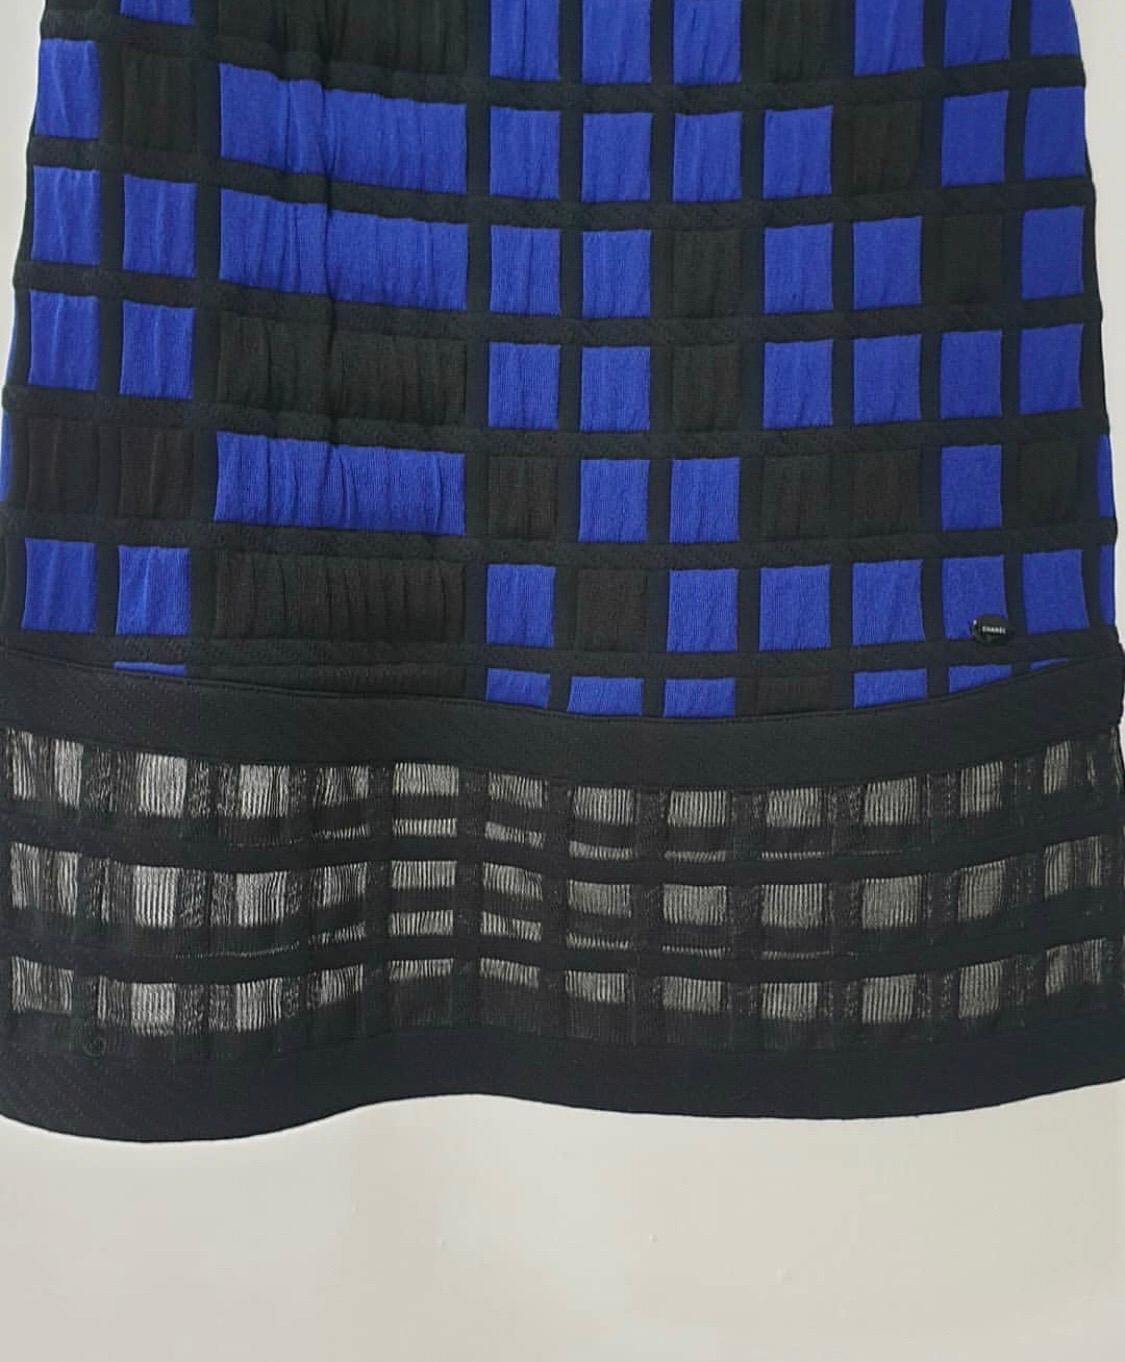 From the  cruise 2013 runway collection

Excellent condition.

Features a blue and black checkered geometric pattern with mash checkering at the hem. Elastic around bust. Side zipper with hook & eye fastening. 

Size 38 
roughly size 4-6 US. 

For